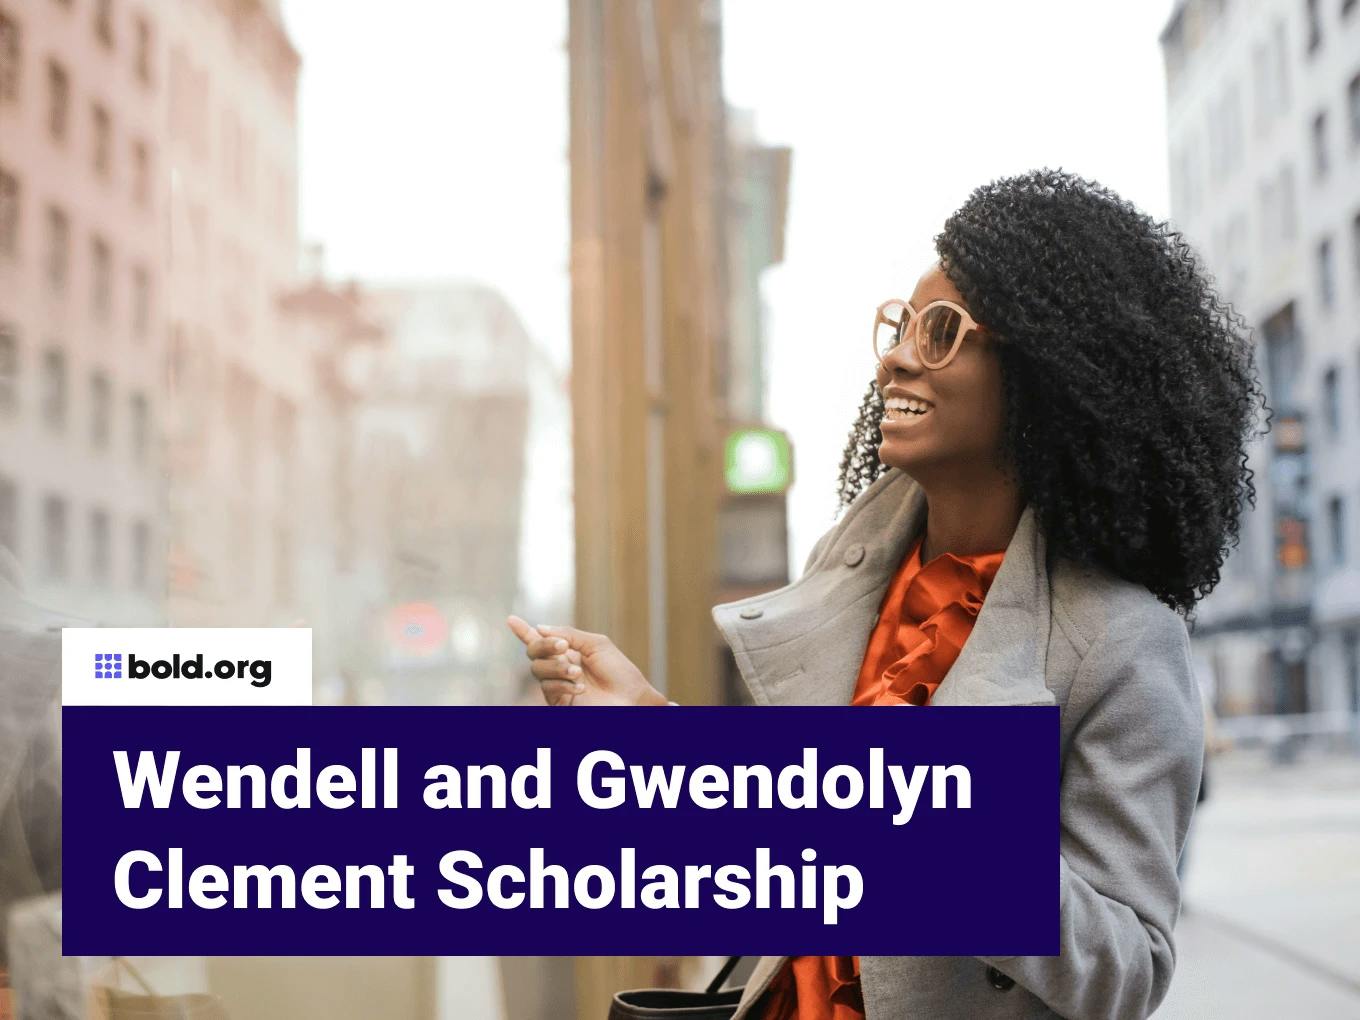 Wendell and Gwendolyn Clement Scholarship